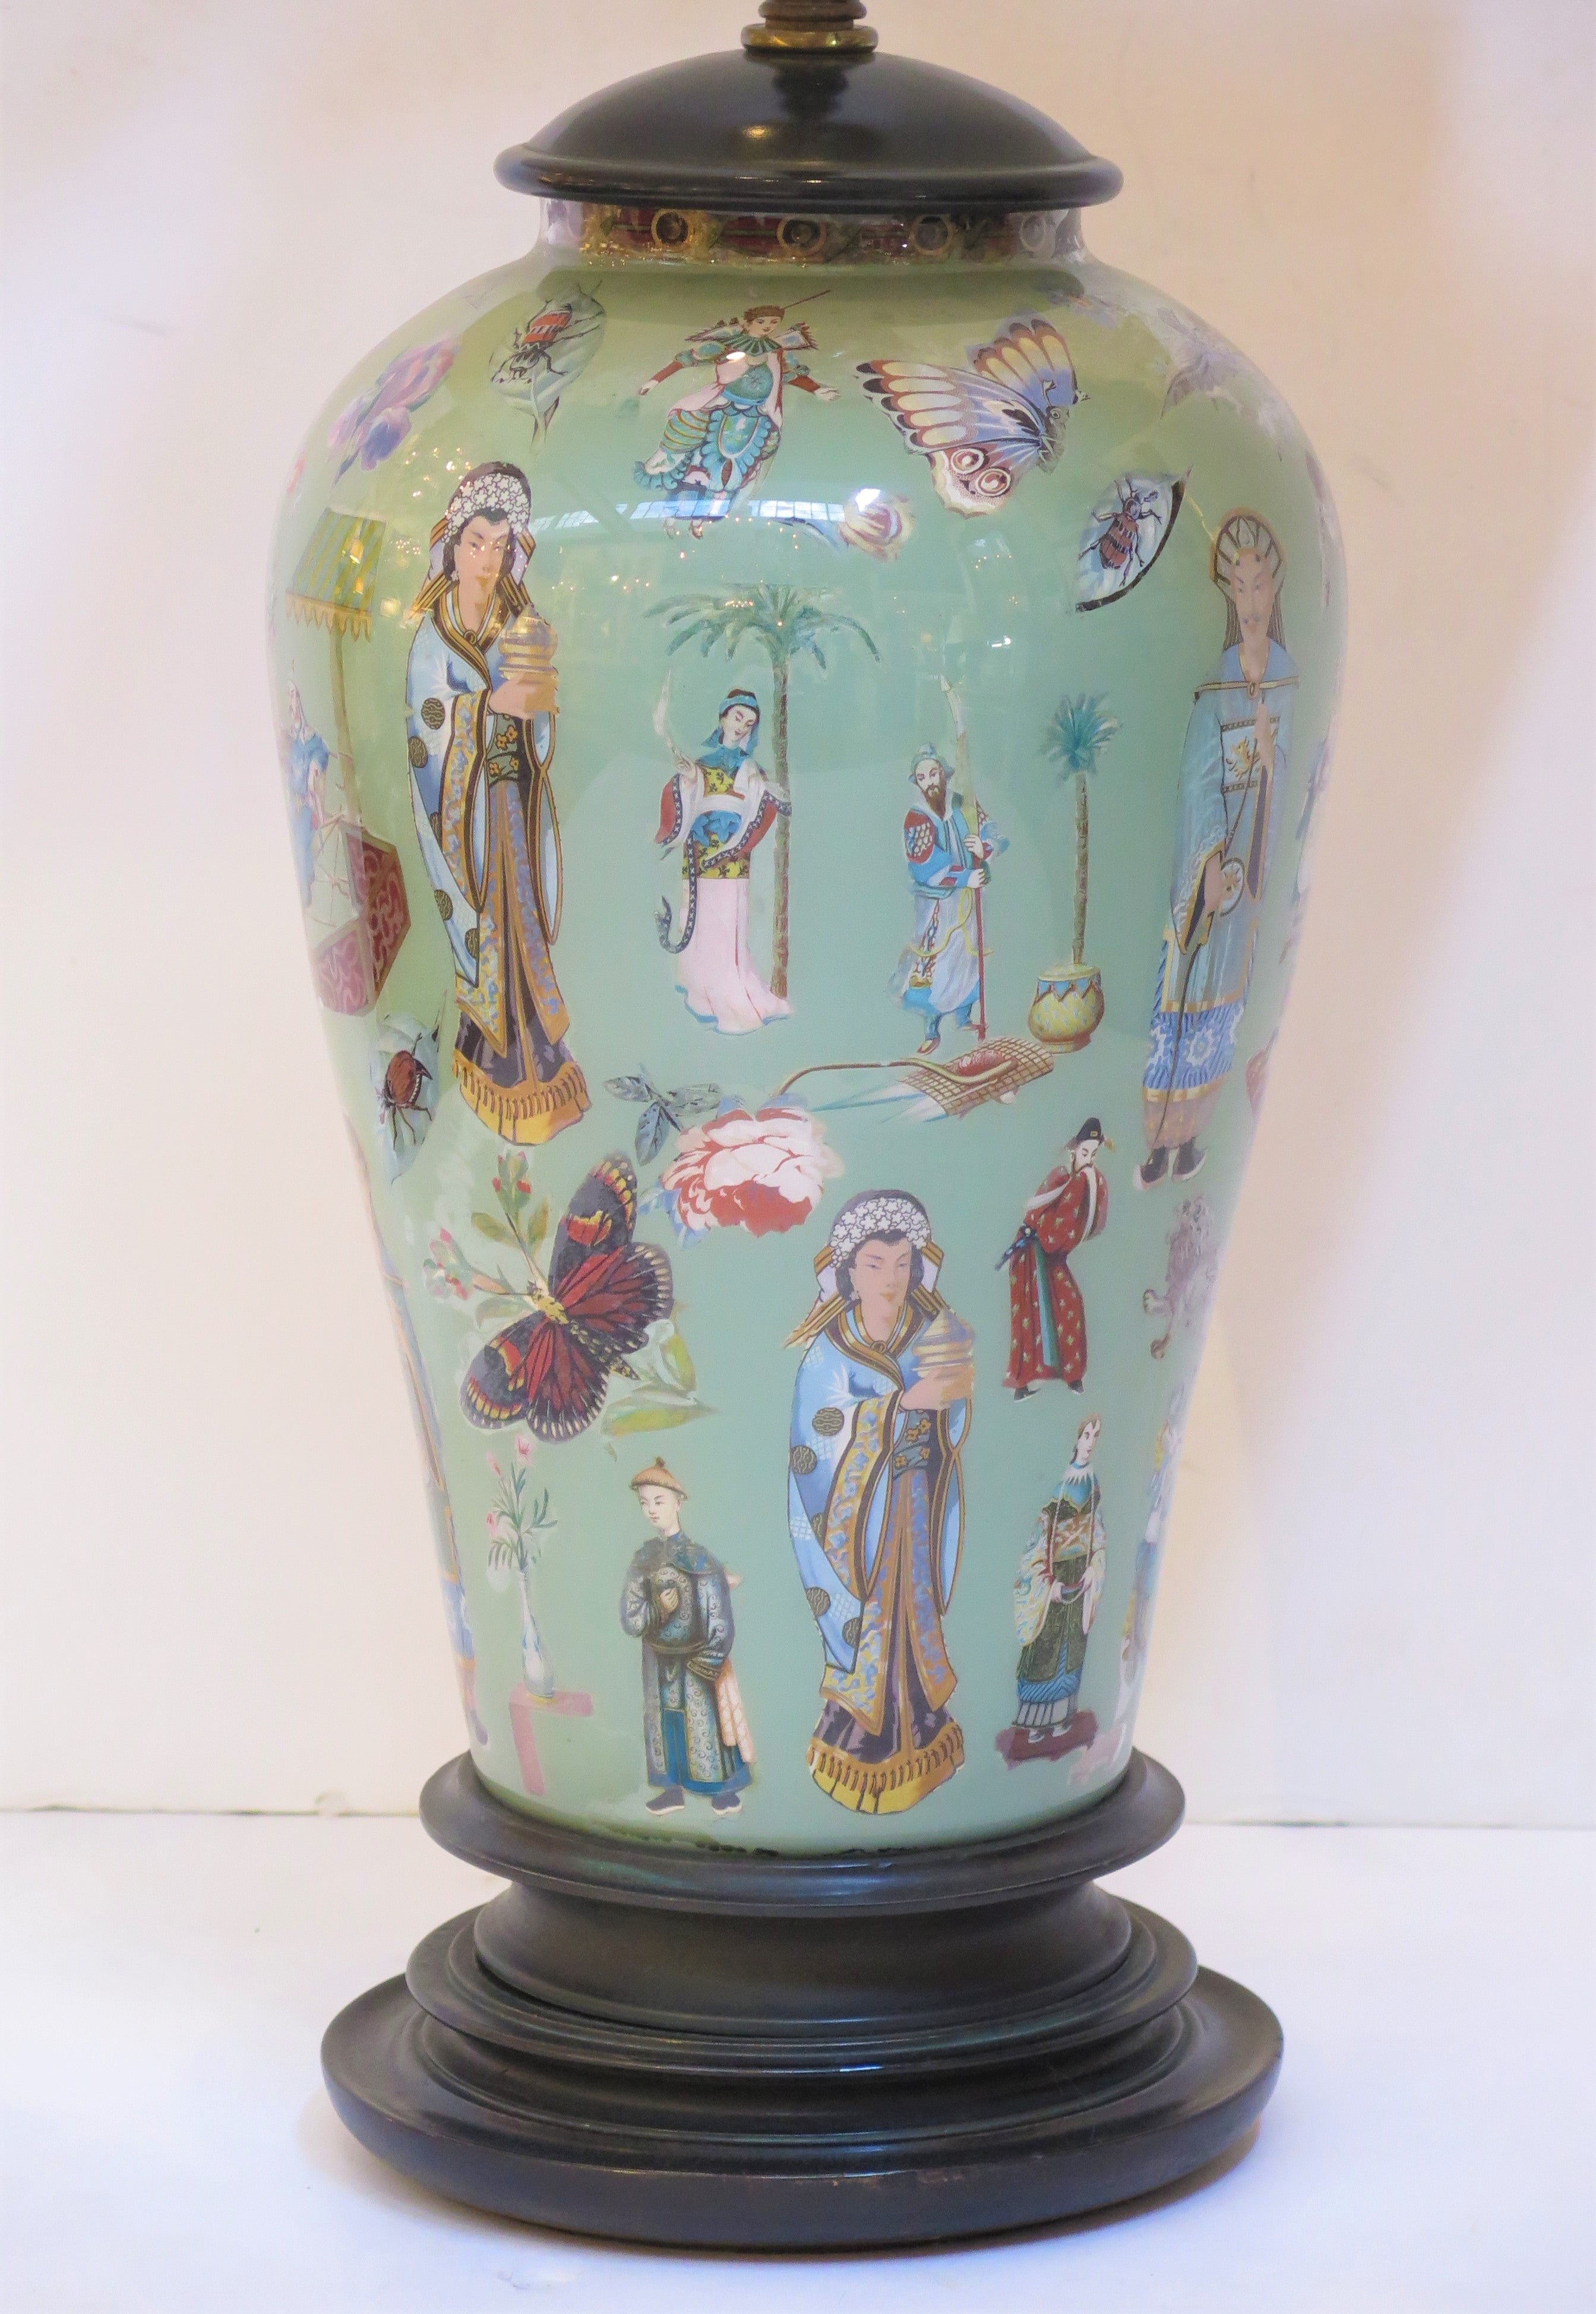 An English Lamp with Decalcomania Chinoiserie Manner Decoration